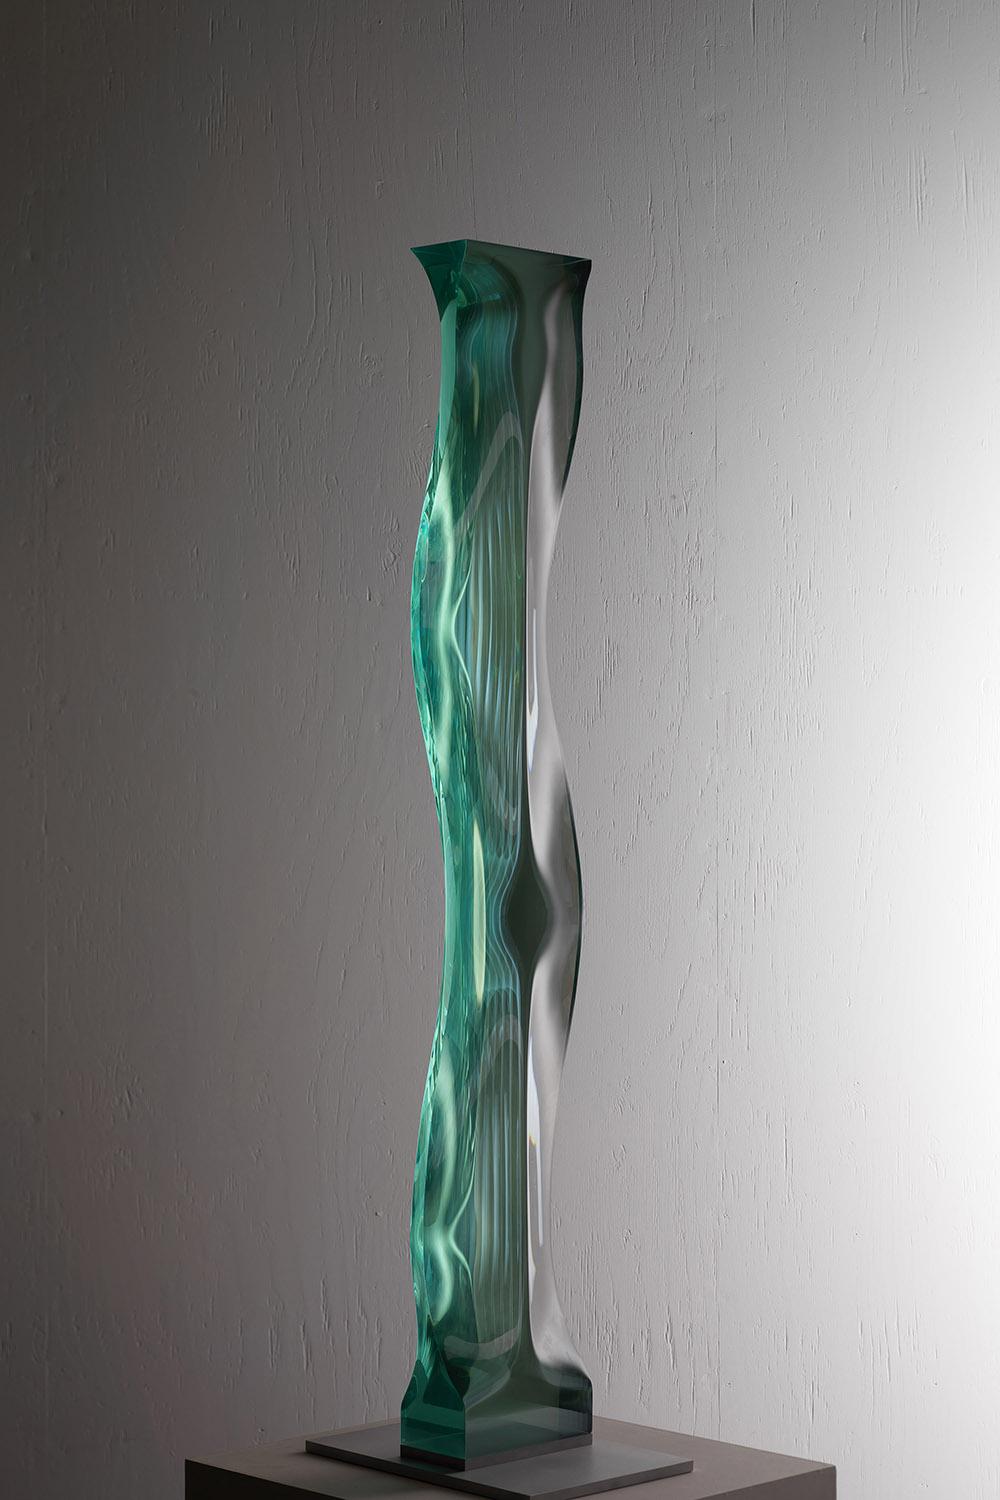 M.080601 is a glass sculpture by Japanese contemporary artist Toshio Iezumi, dimensions are 130 × 20 × 10 cm (51.2 × 7.9 × 3.9 in). 
The sculpture is signed and numbered, it is part of a limited edition of 3 editions and comes with a certificate of